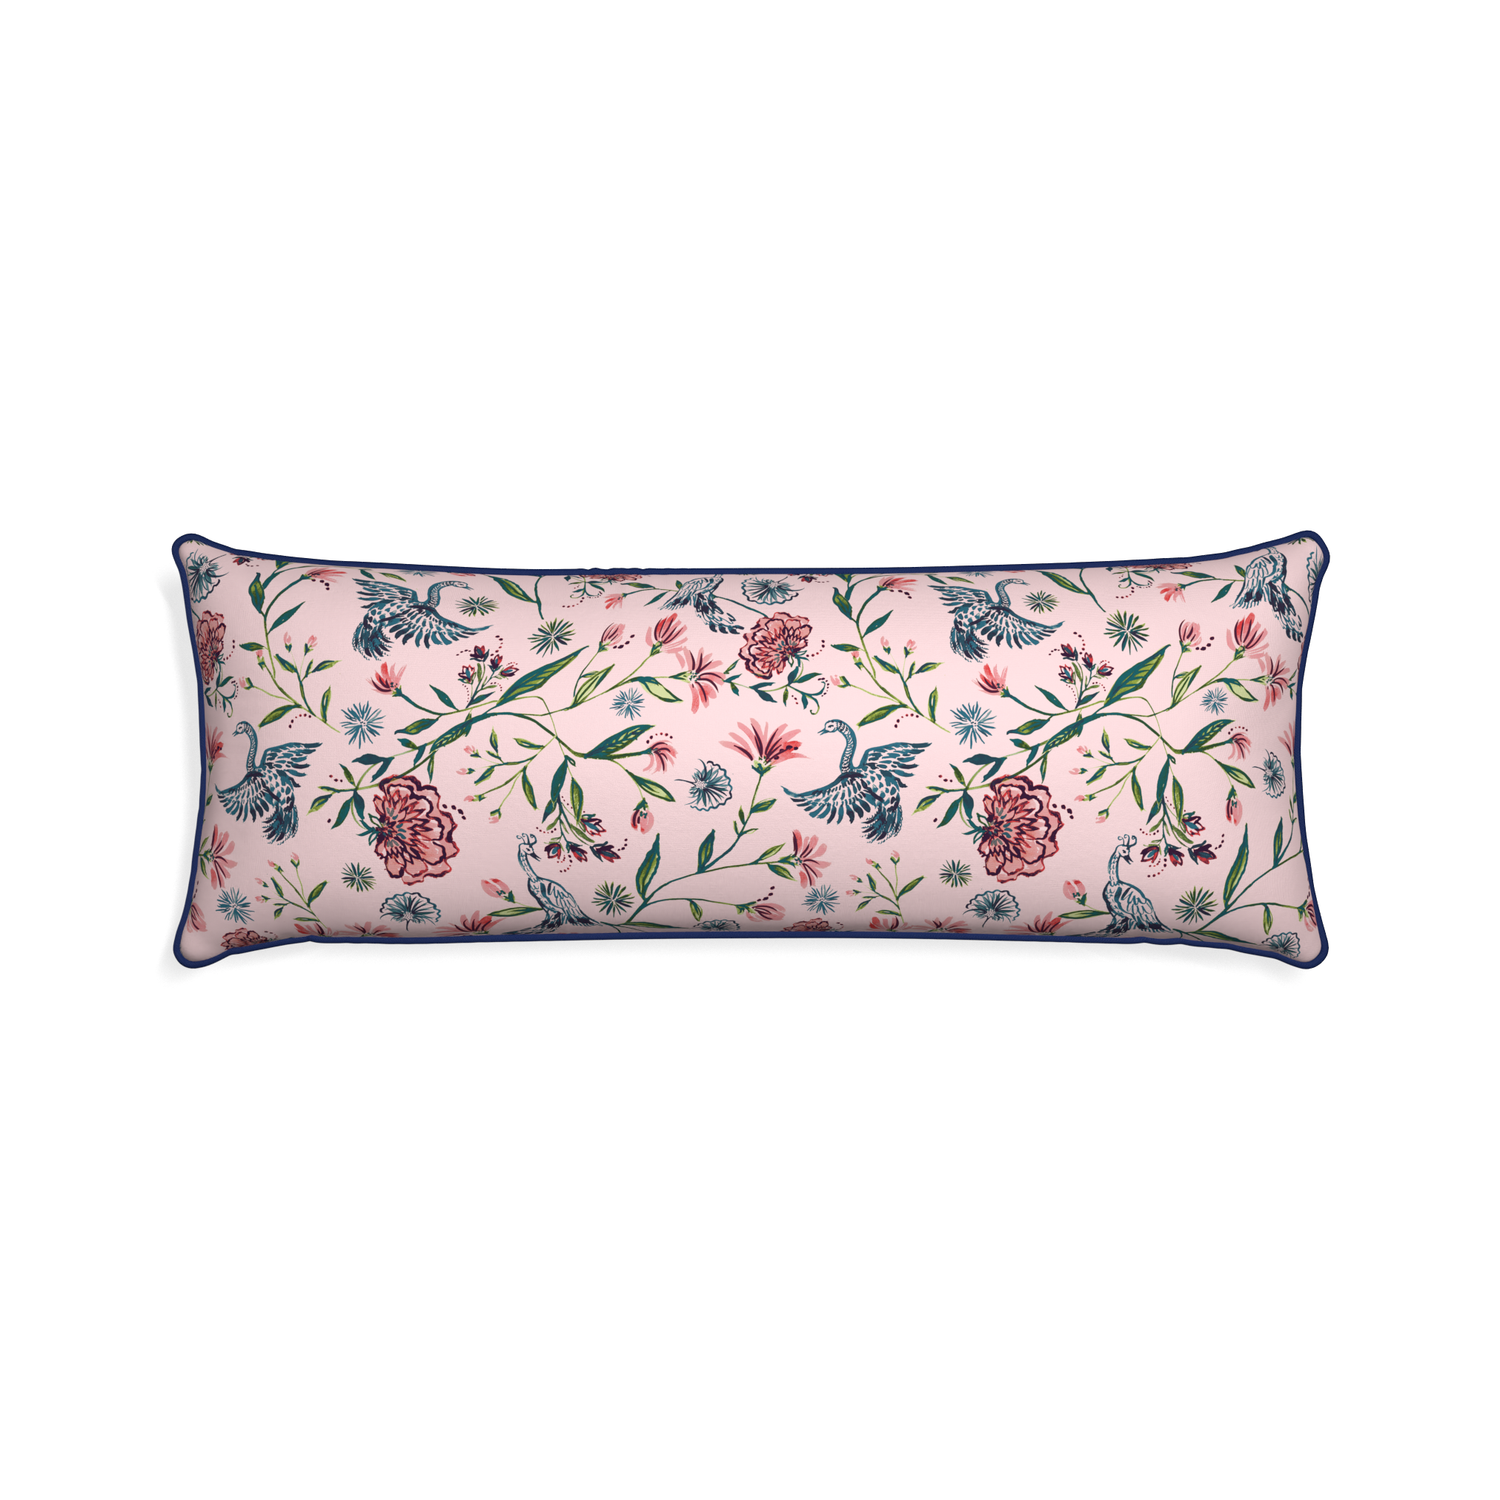 Xl-lumbar daphne rose custom pillow with midnight piping on white background